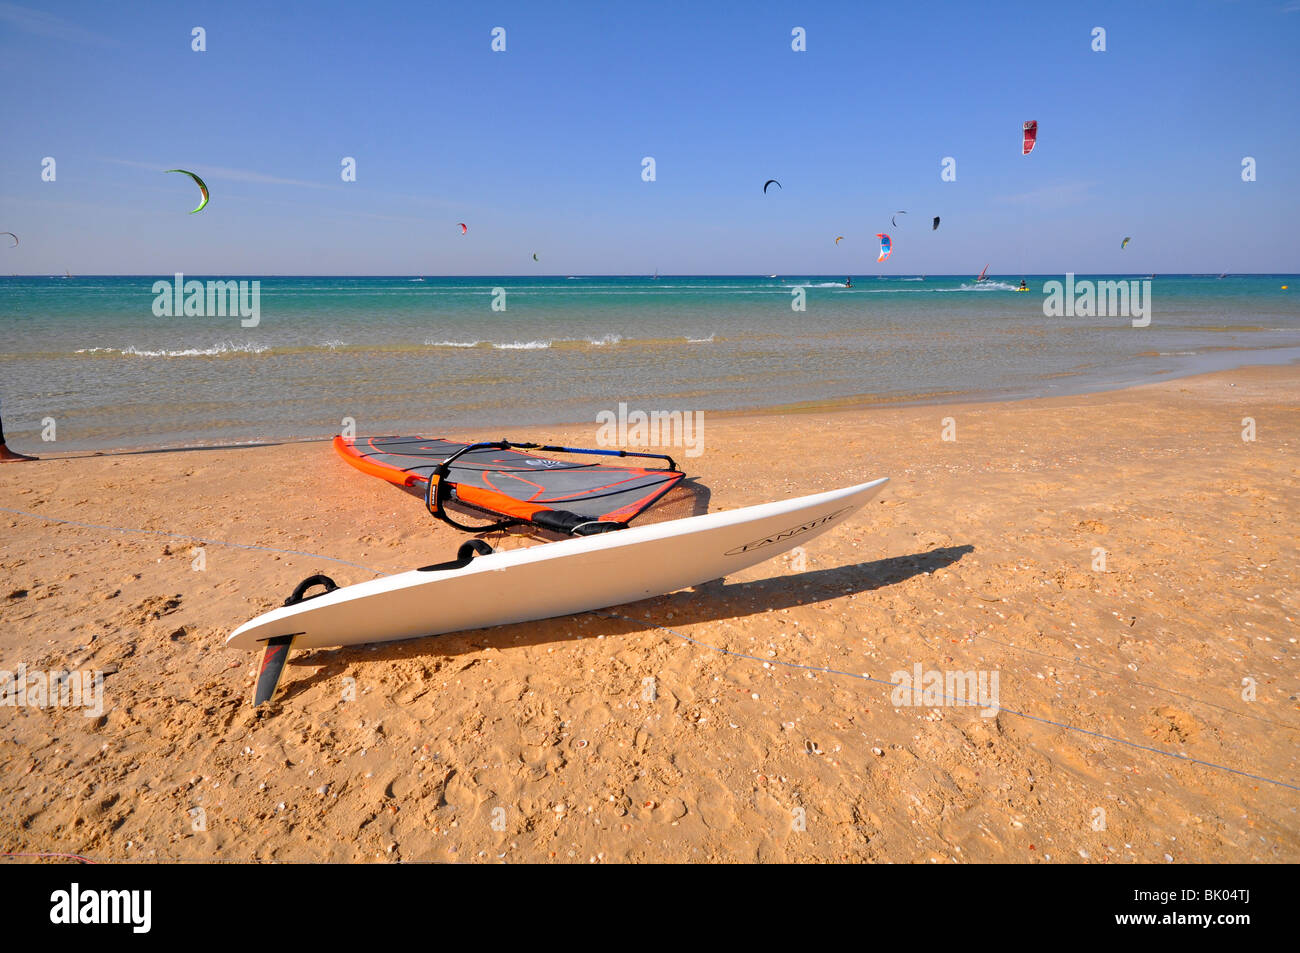 Windsurfing board and sail on the beach Stock Photo - Alamy